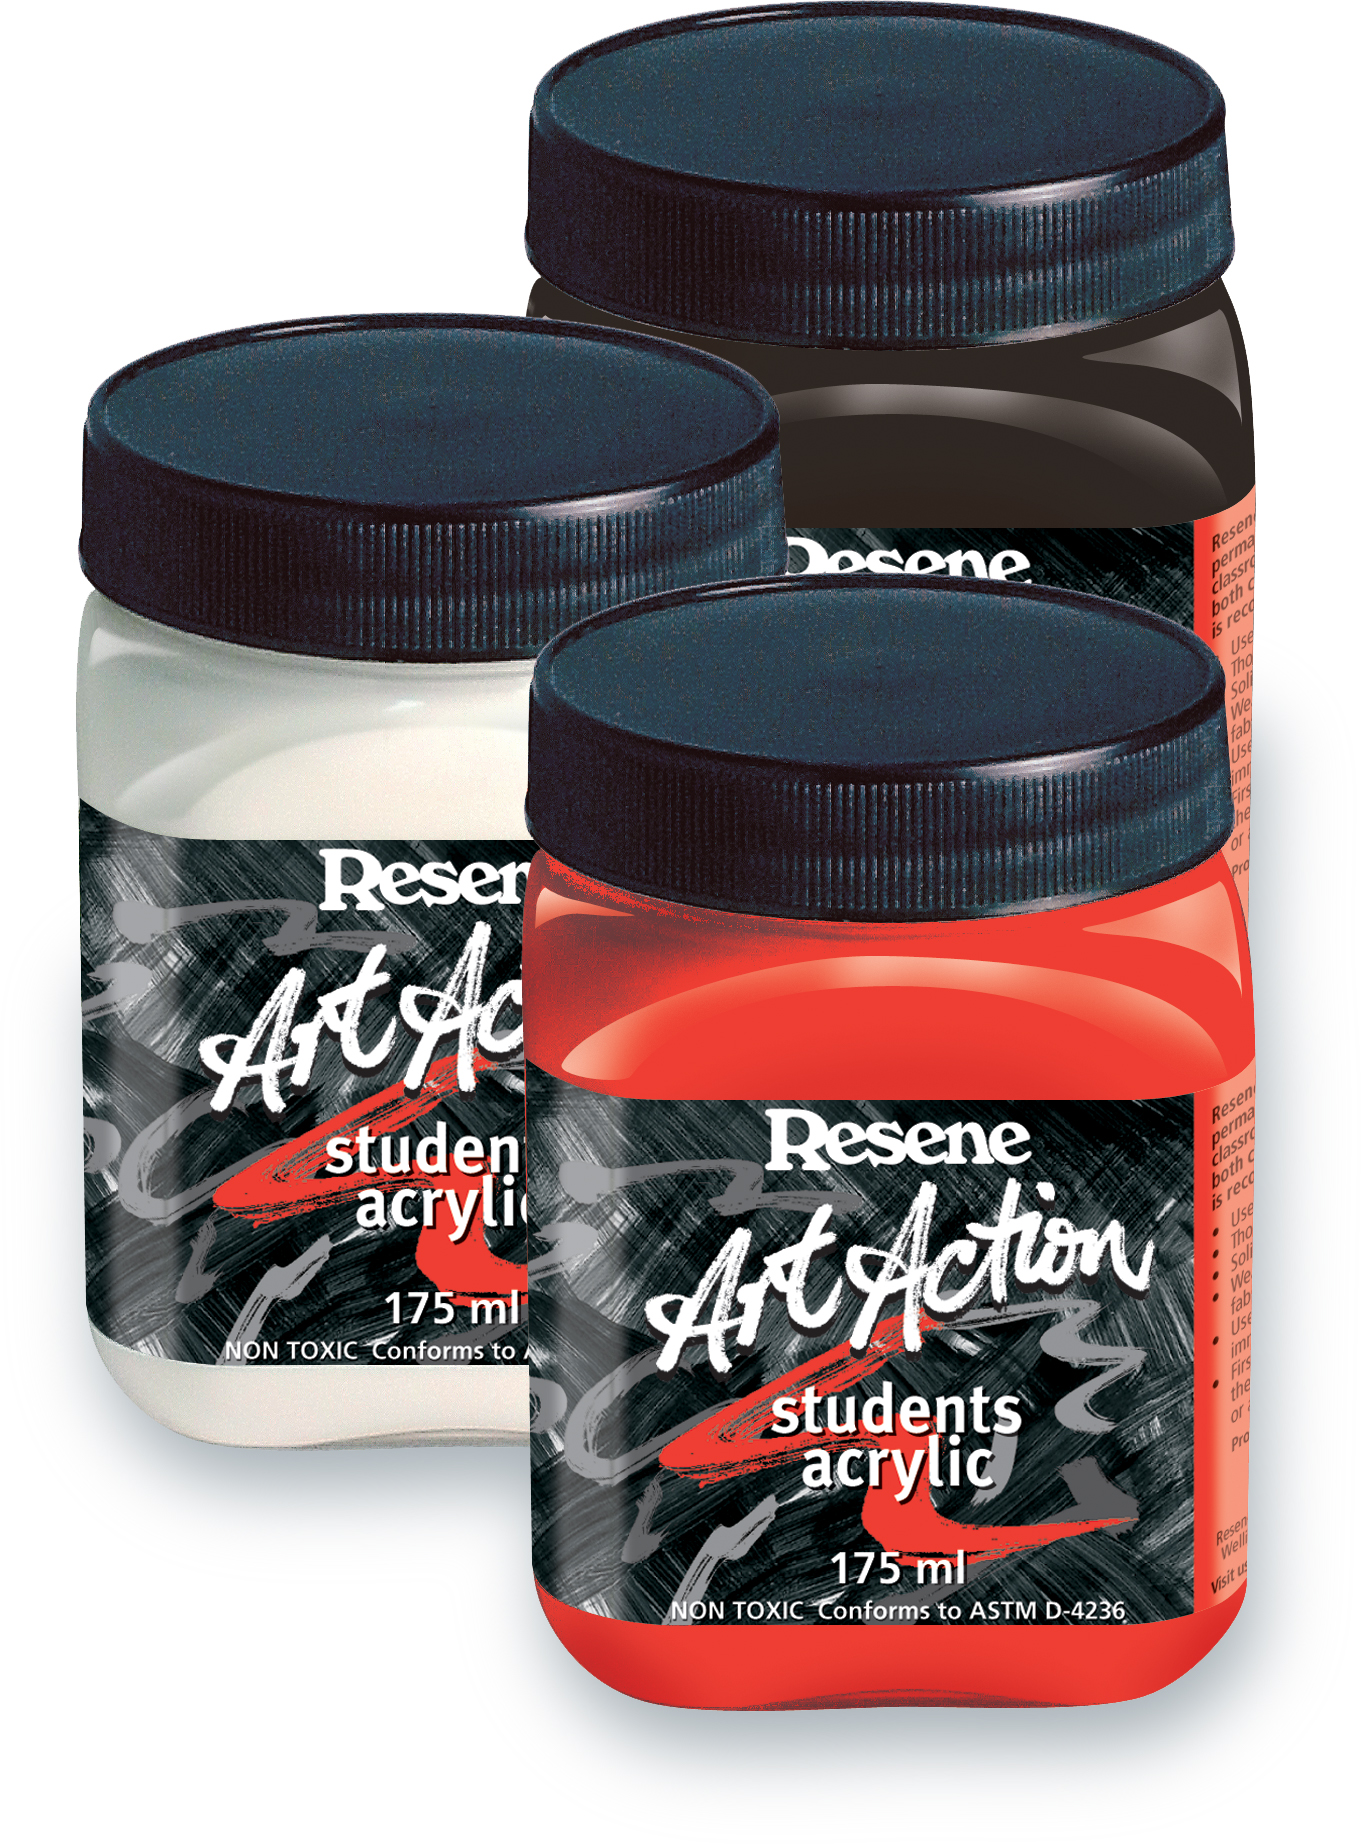 Resene Art Action Paints Product Shot And Cmyk And Rgb Downloads